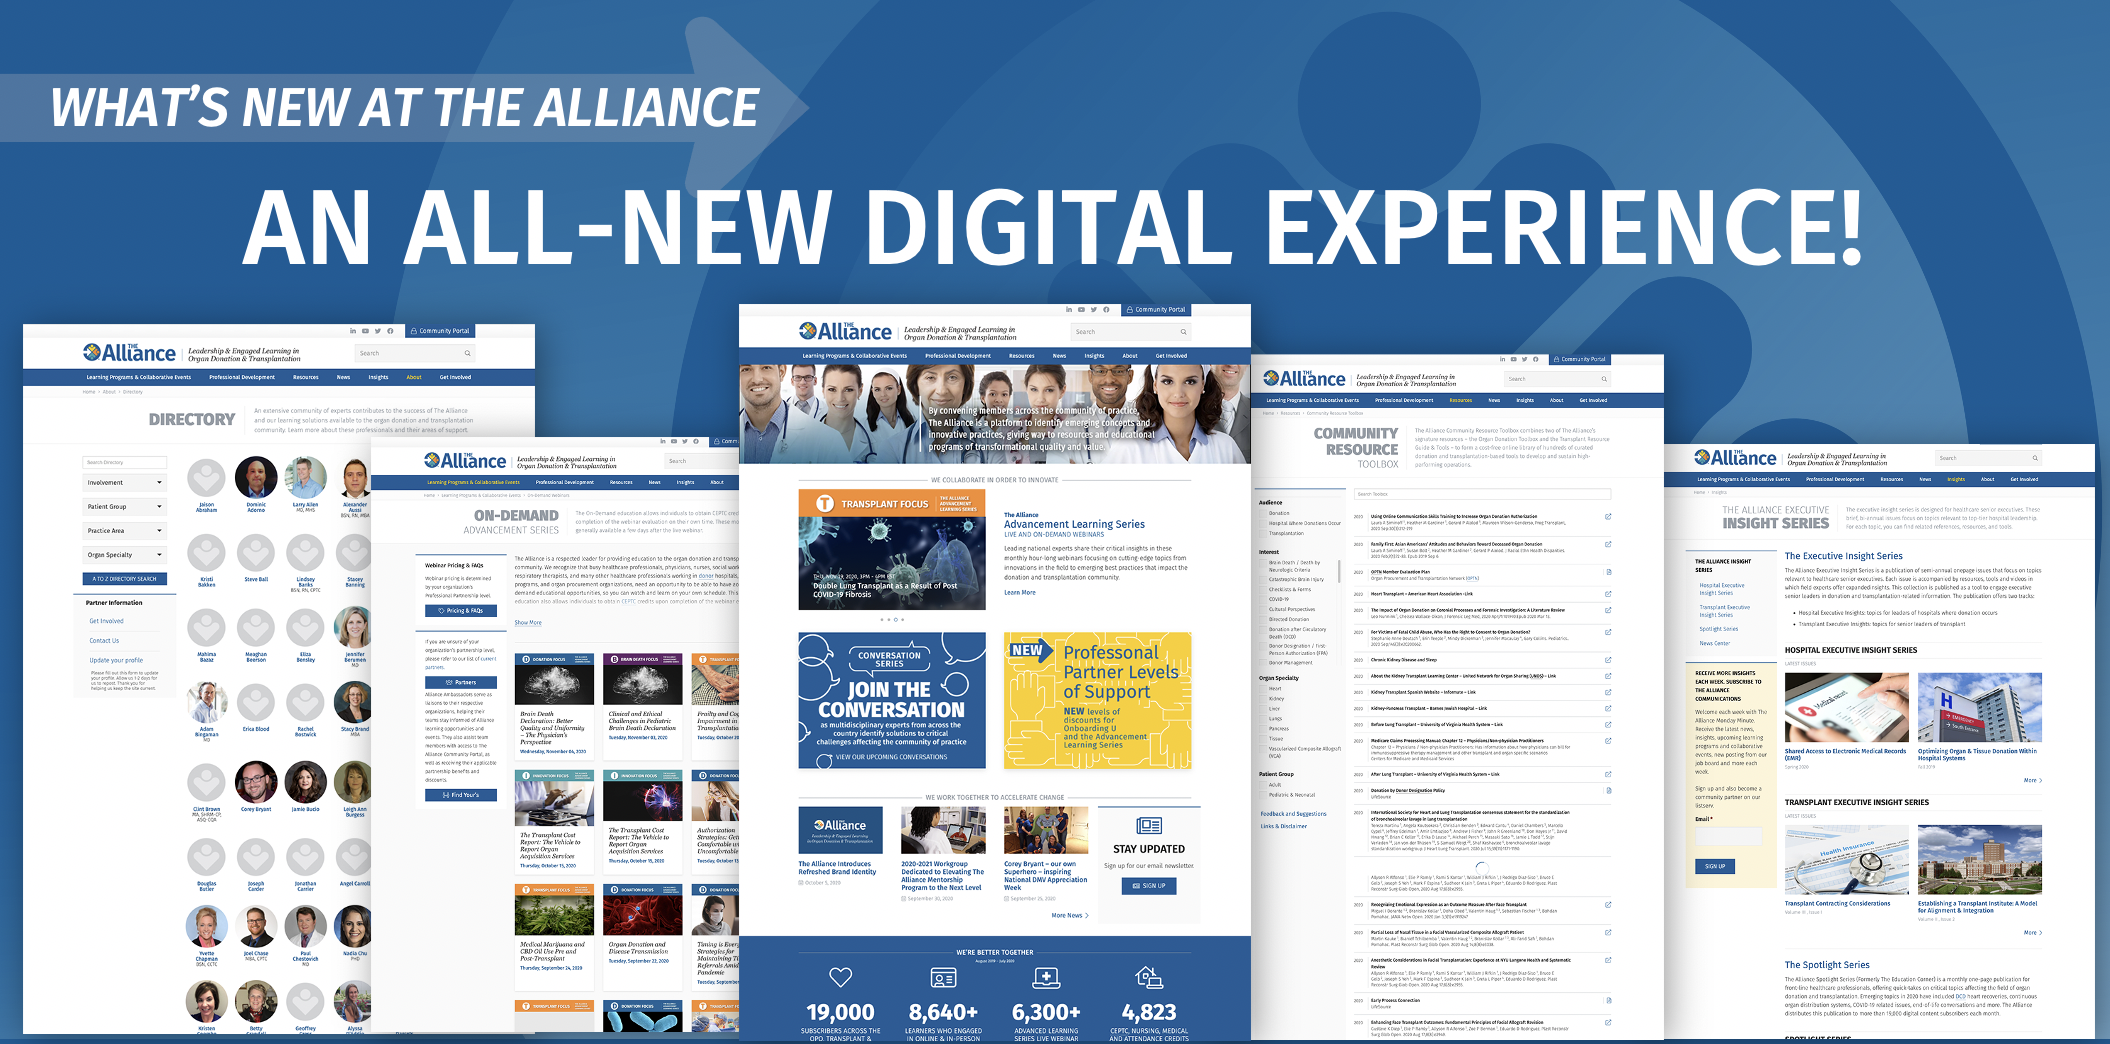 All New Digital Experience